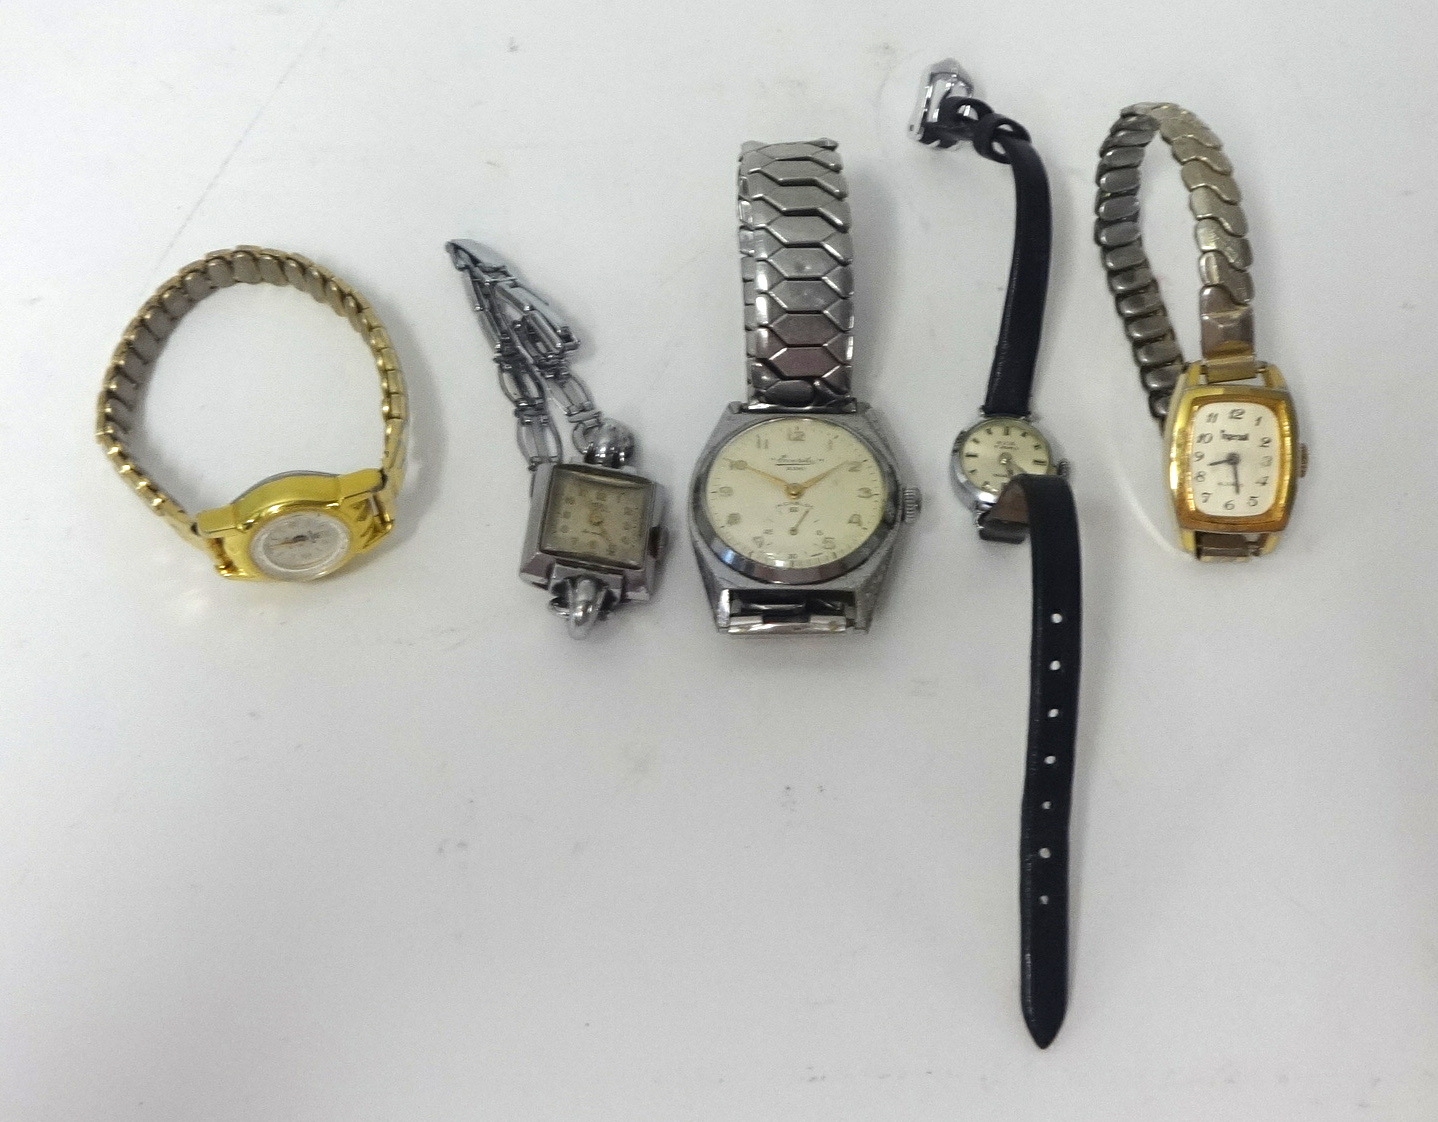 An Everite wrist watch and four other ladies watches.